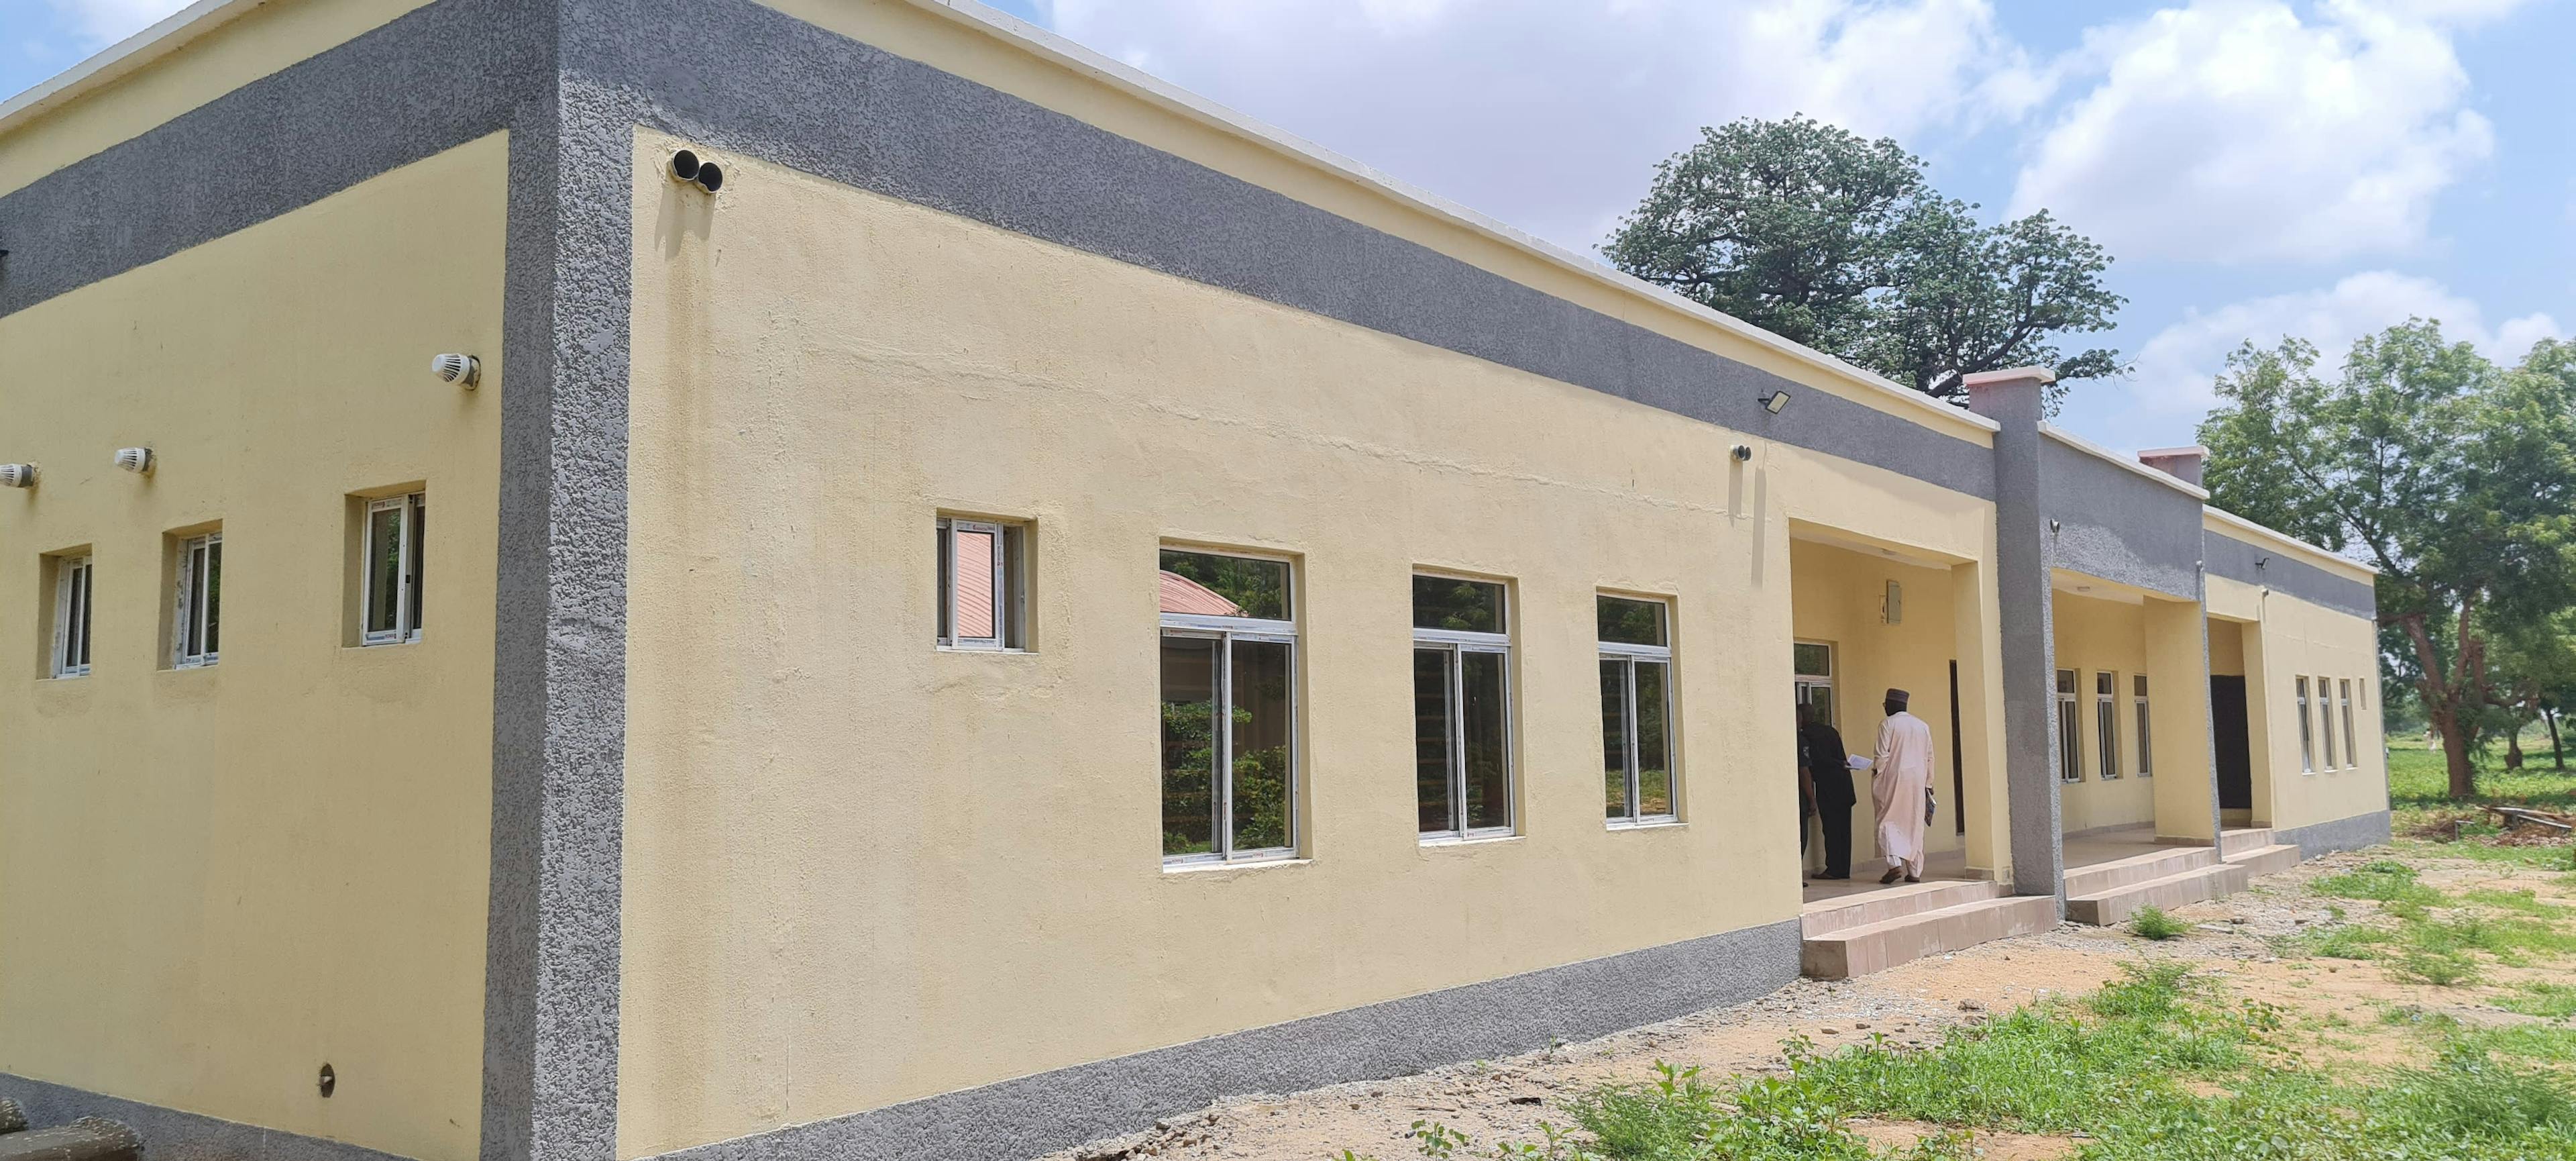 Construction Of Modern Classrooms For Cadet 